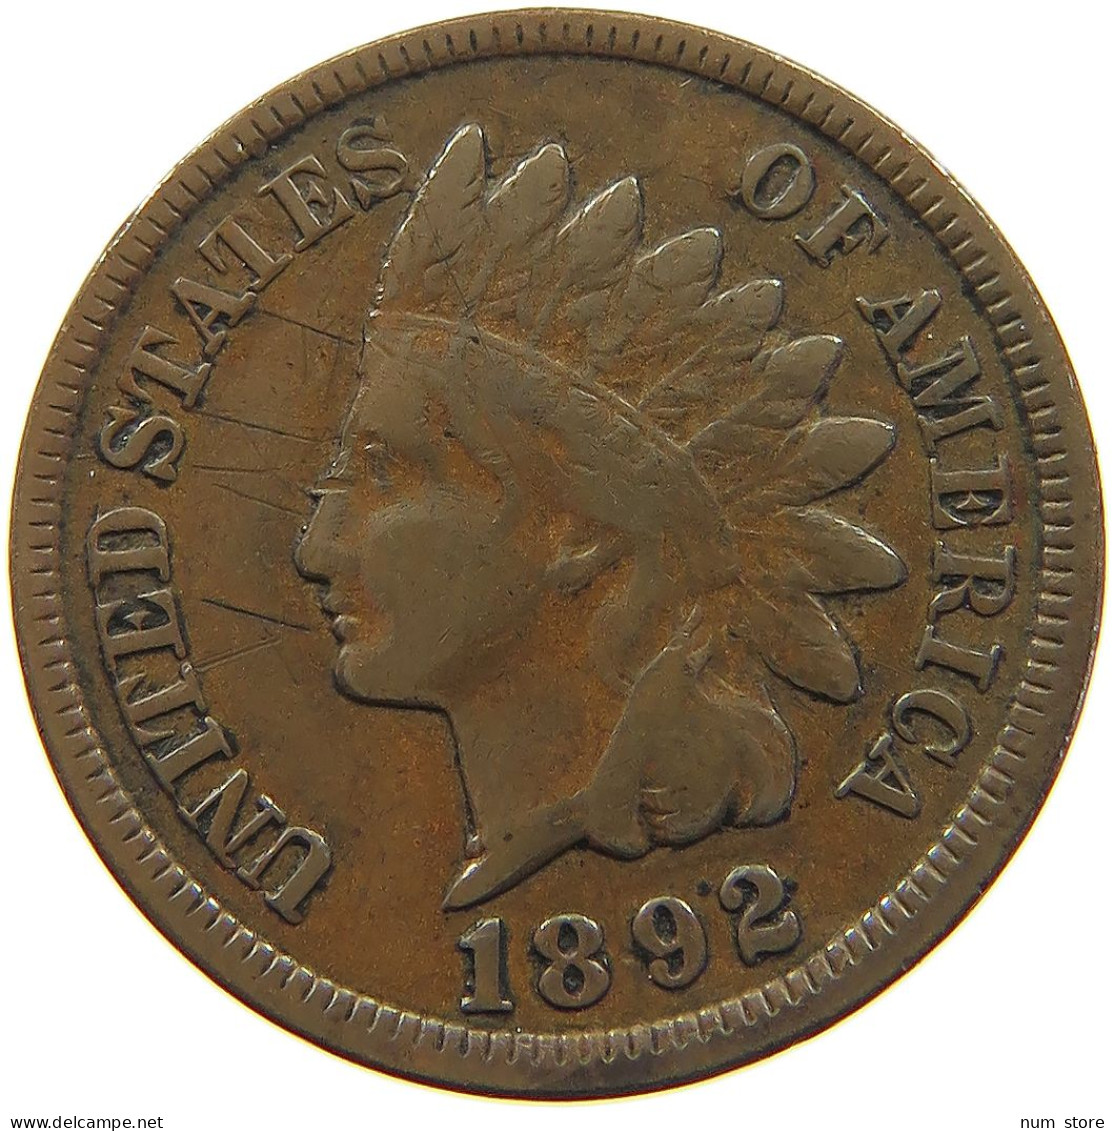 UNITED STATES OF AMERICA CENT 1892 INDIAN HEAD #a050 0467 - 1859-1909: Indian Head